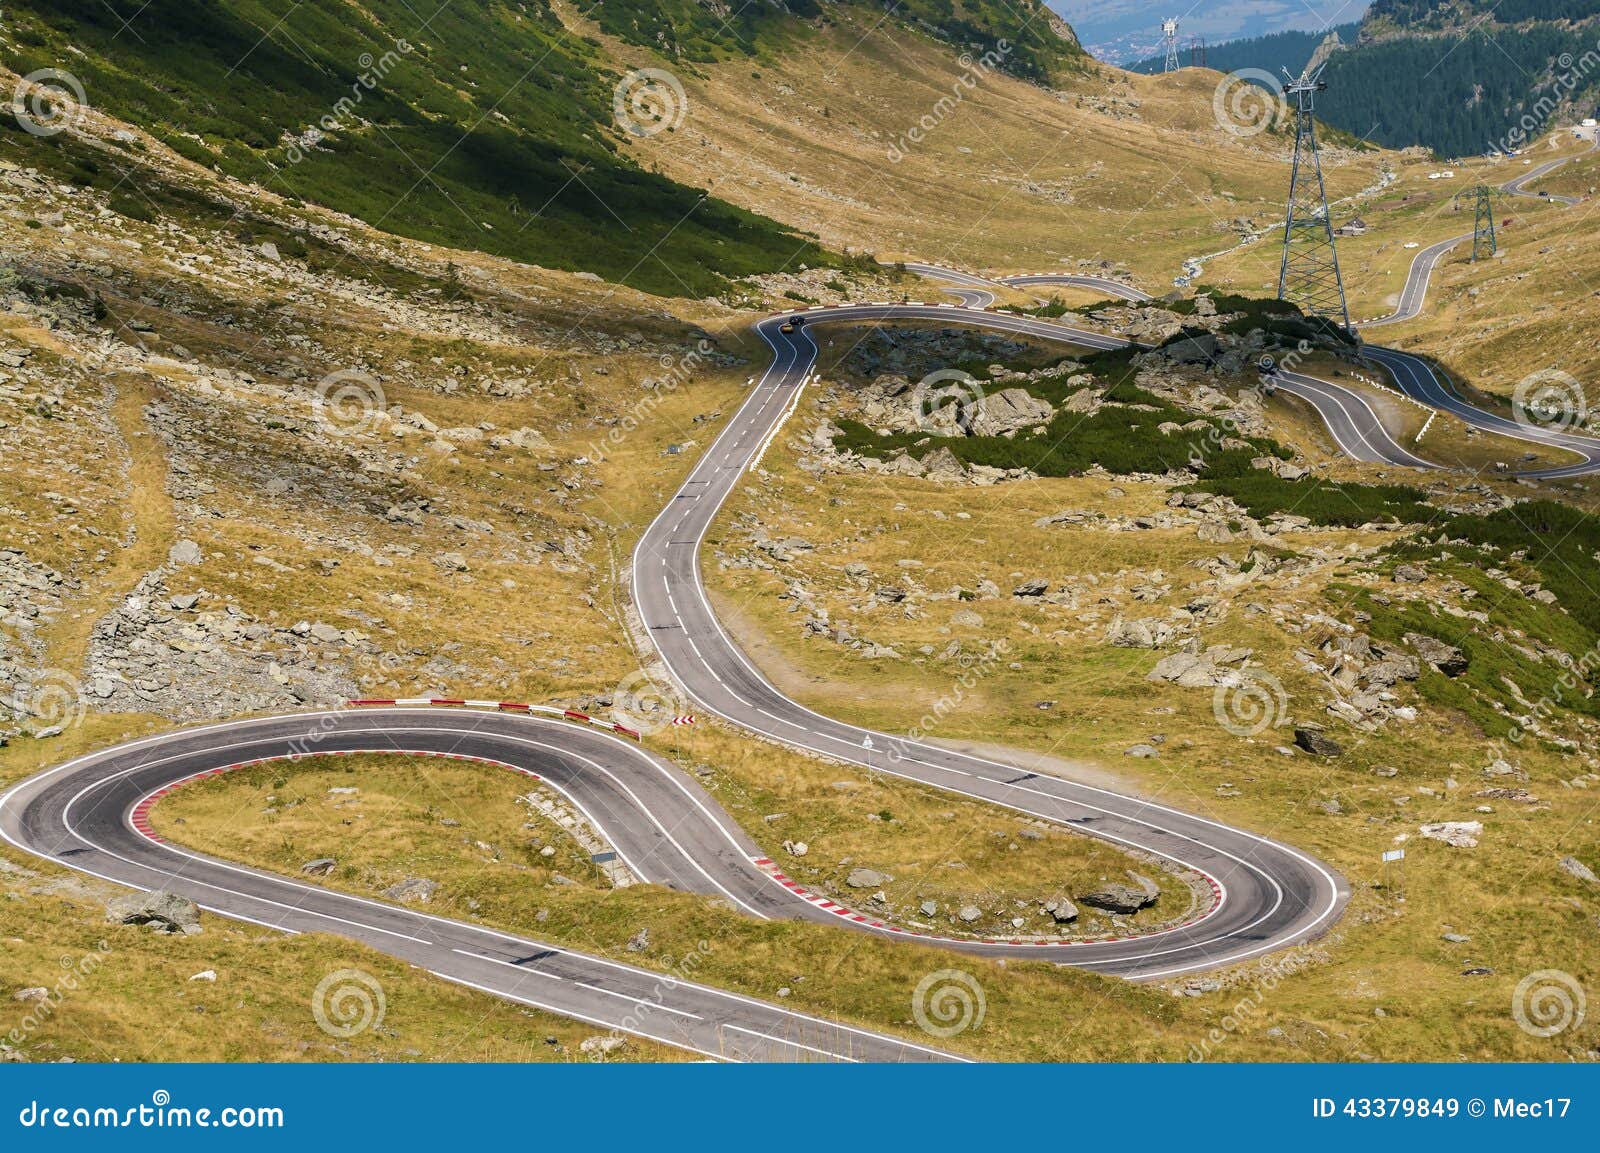 Best road in the world image. Image of auto, beautiful 43379849